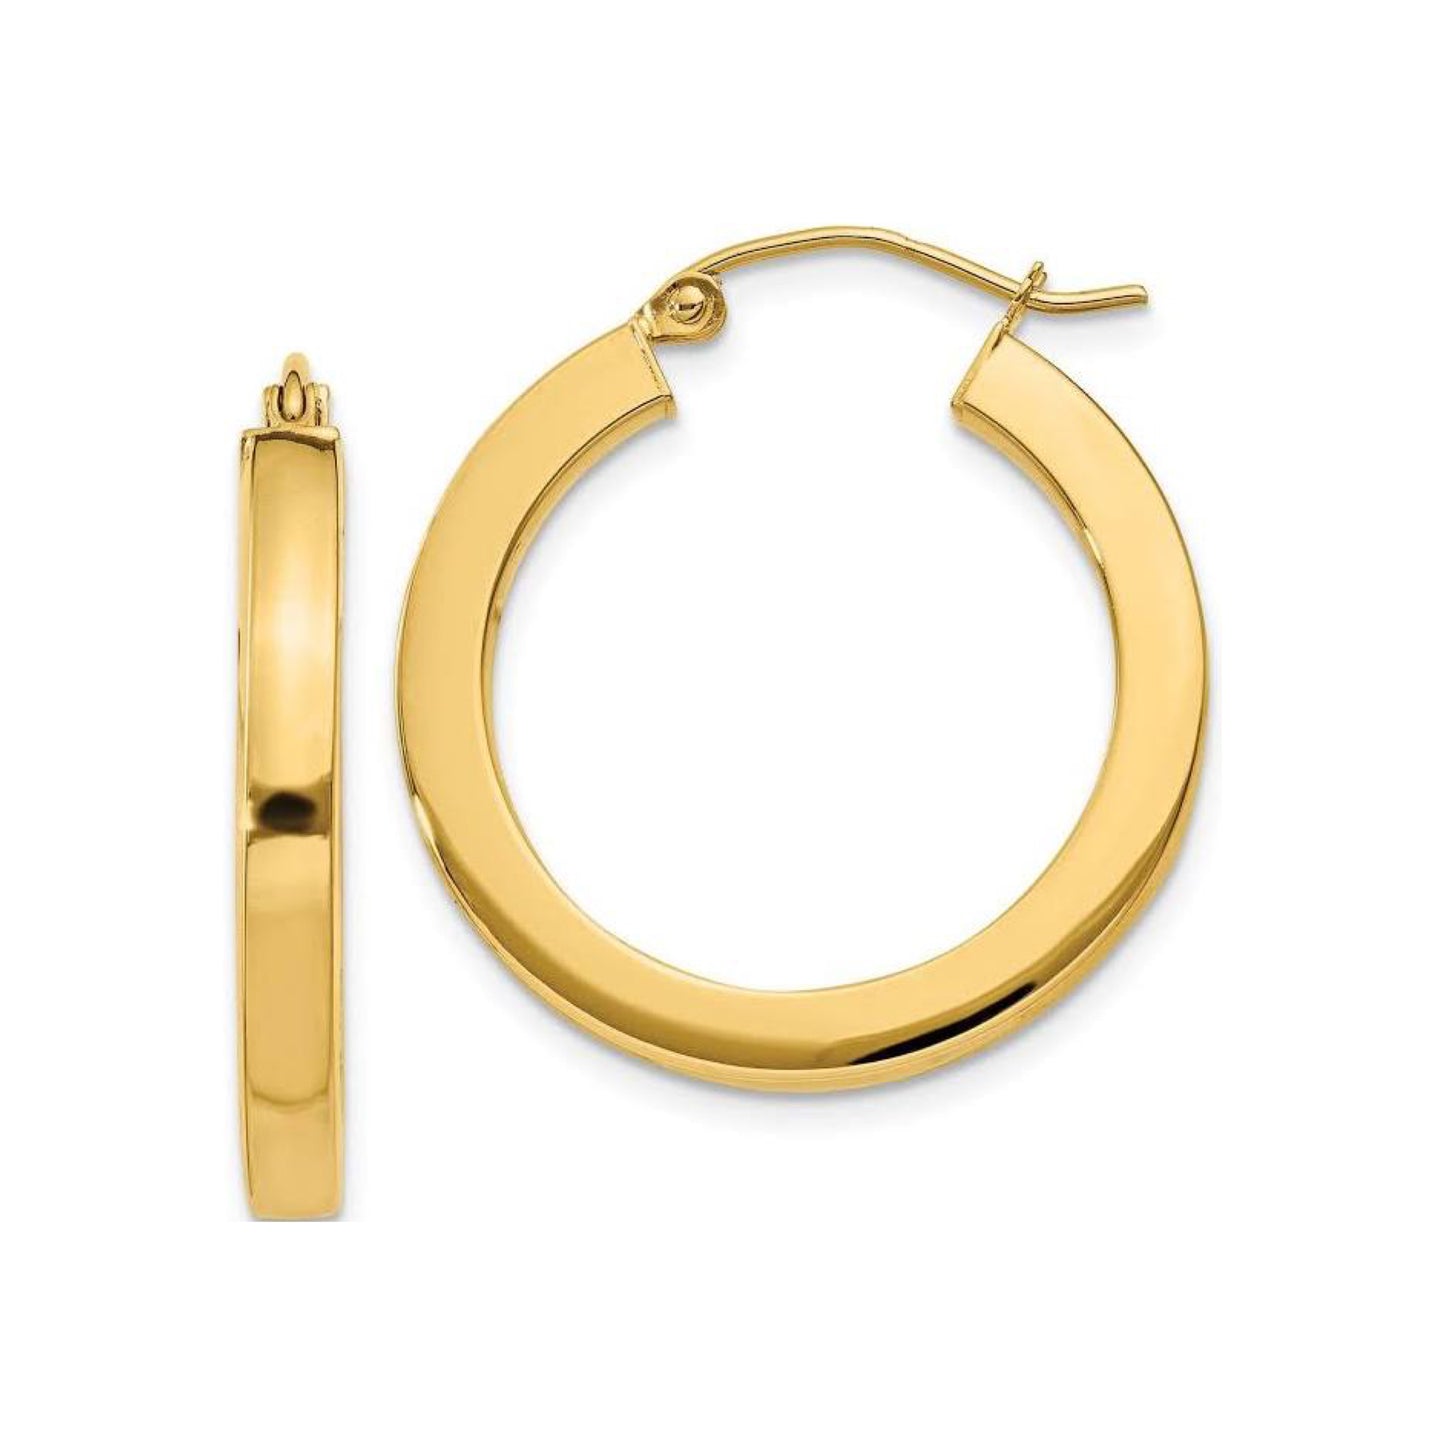 BALI MINI | 18K Gold Stainless Steel 4MM Squared Hollow Round 30MM Mini Hoop Earrings